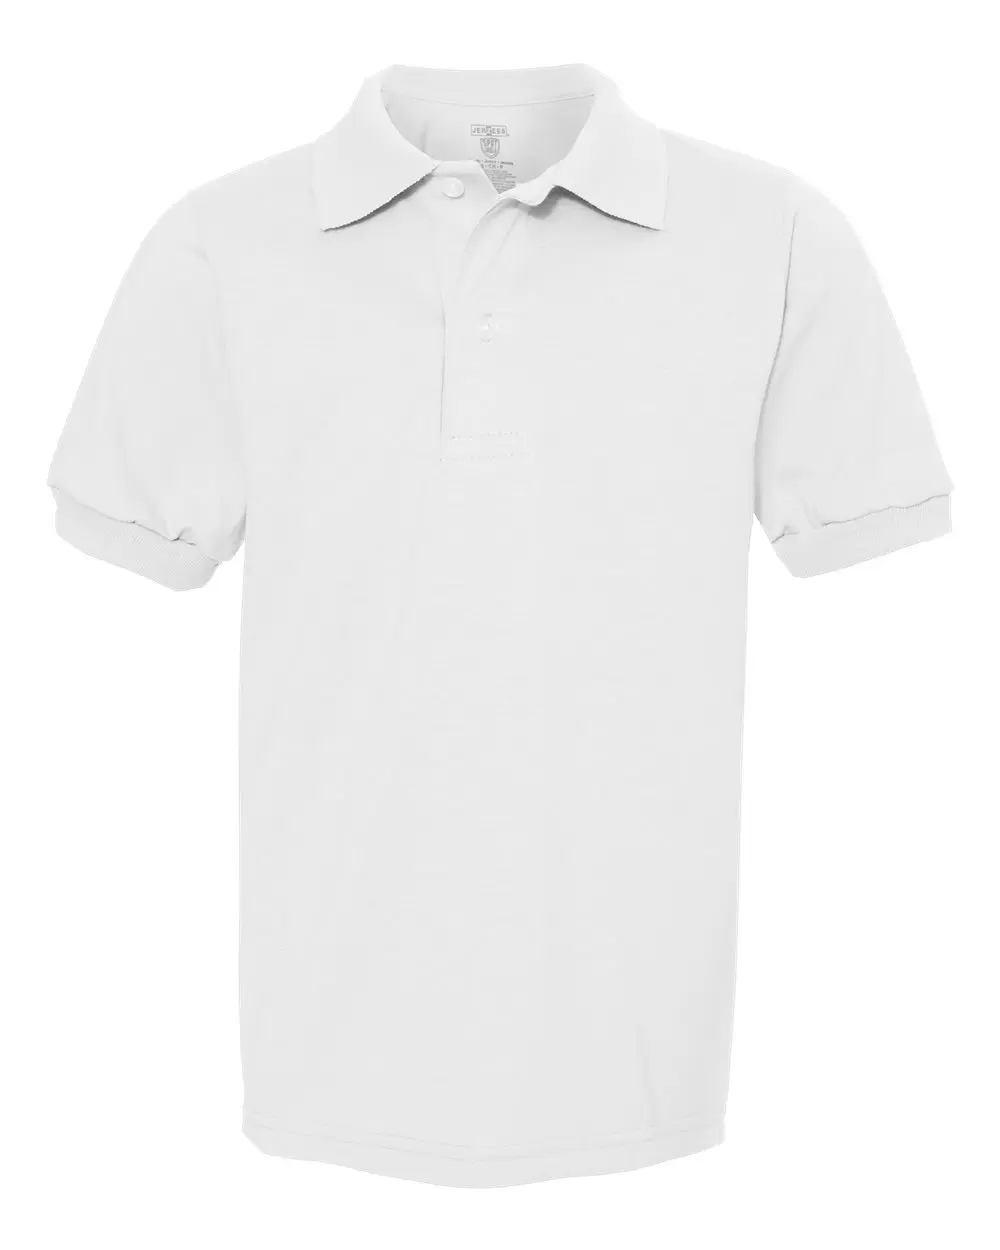 437Y Jerzees Youth 50/50 Jersey Polo with SpotShield® - From $7.18